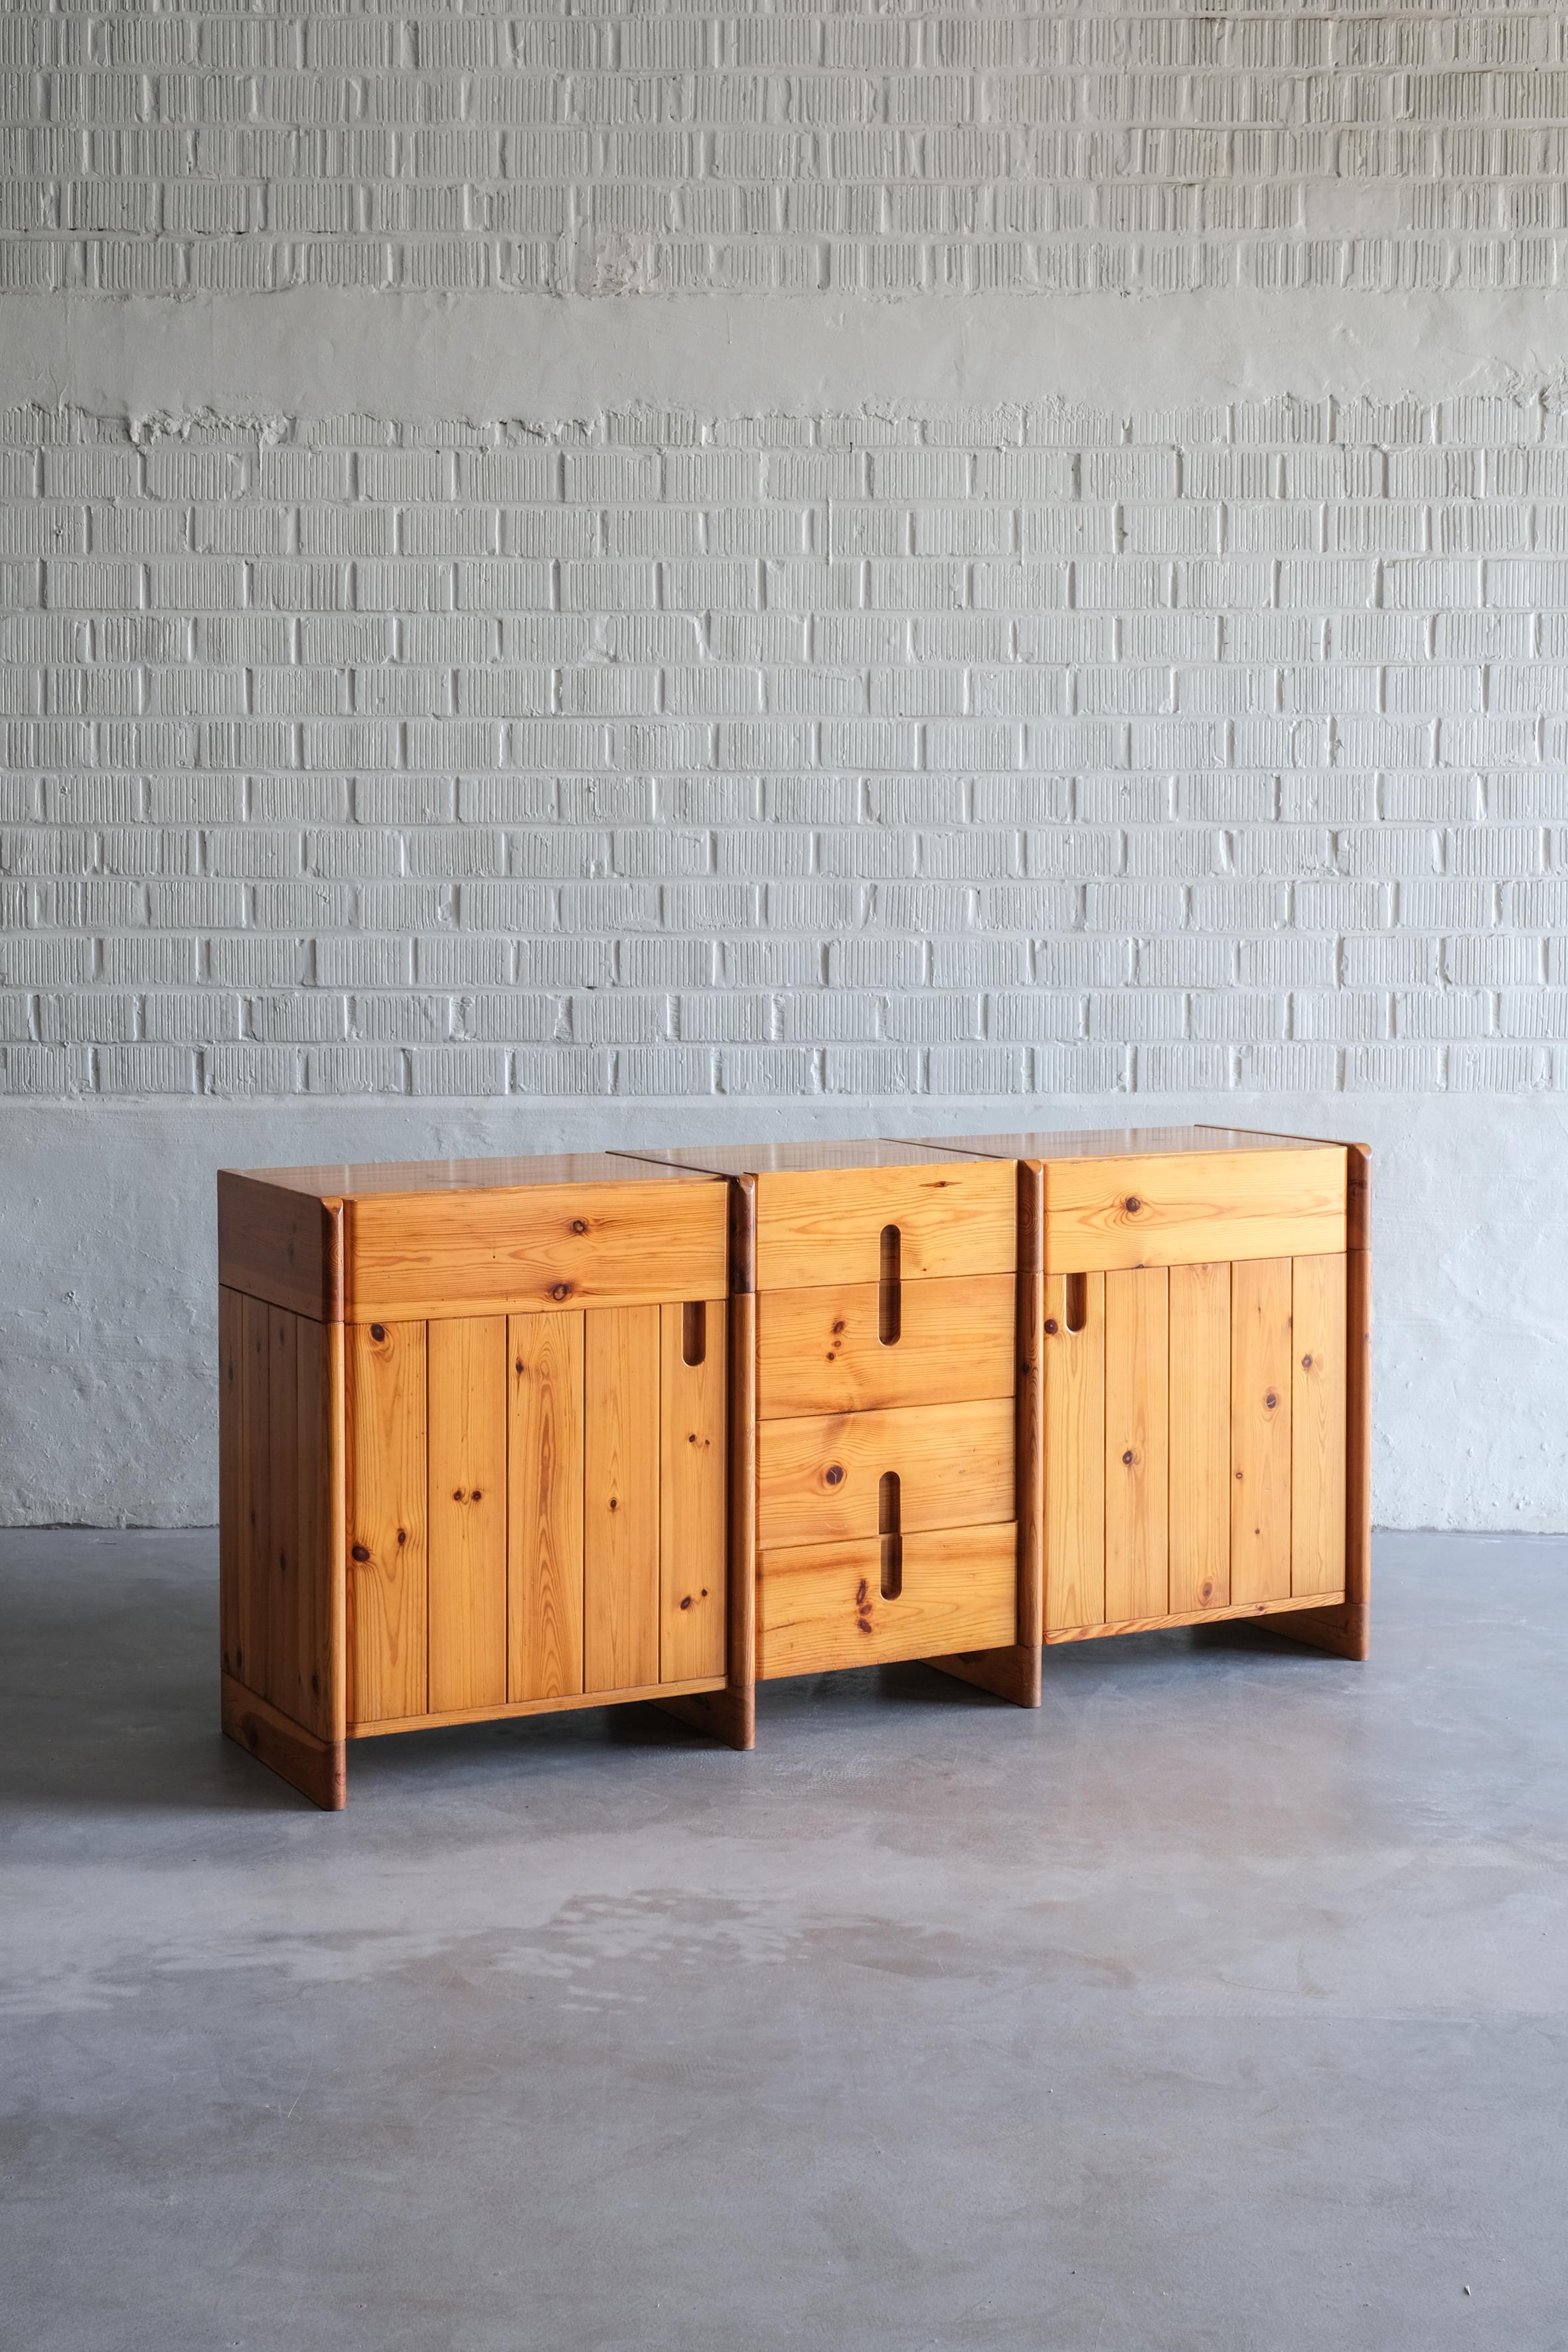 This pinewood sideboard has beautiful patine. Silvio C. made this piece with beautiful details like the way to open the drawers. 

Overall in good vintage condition. 